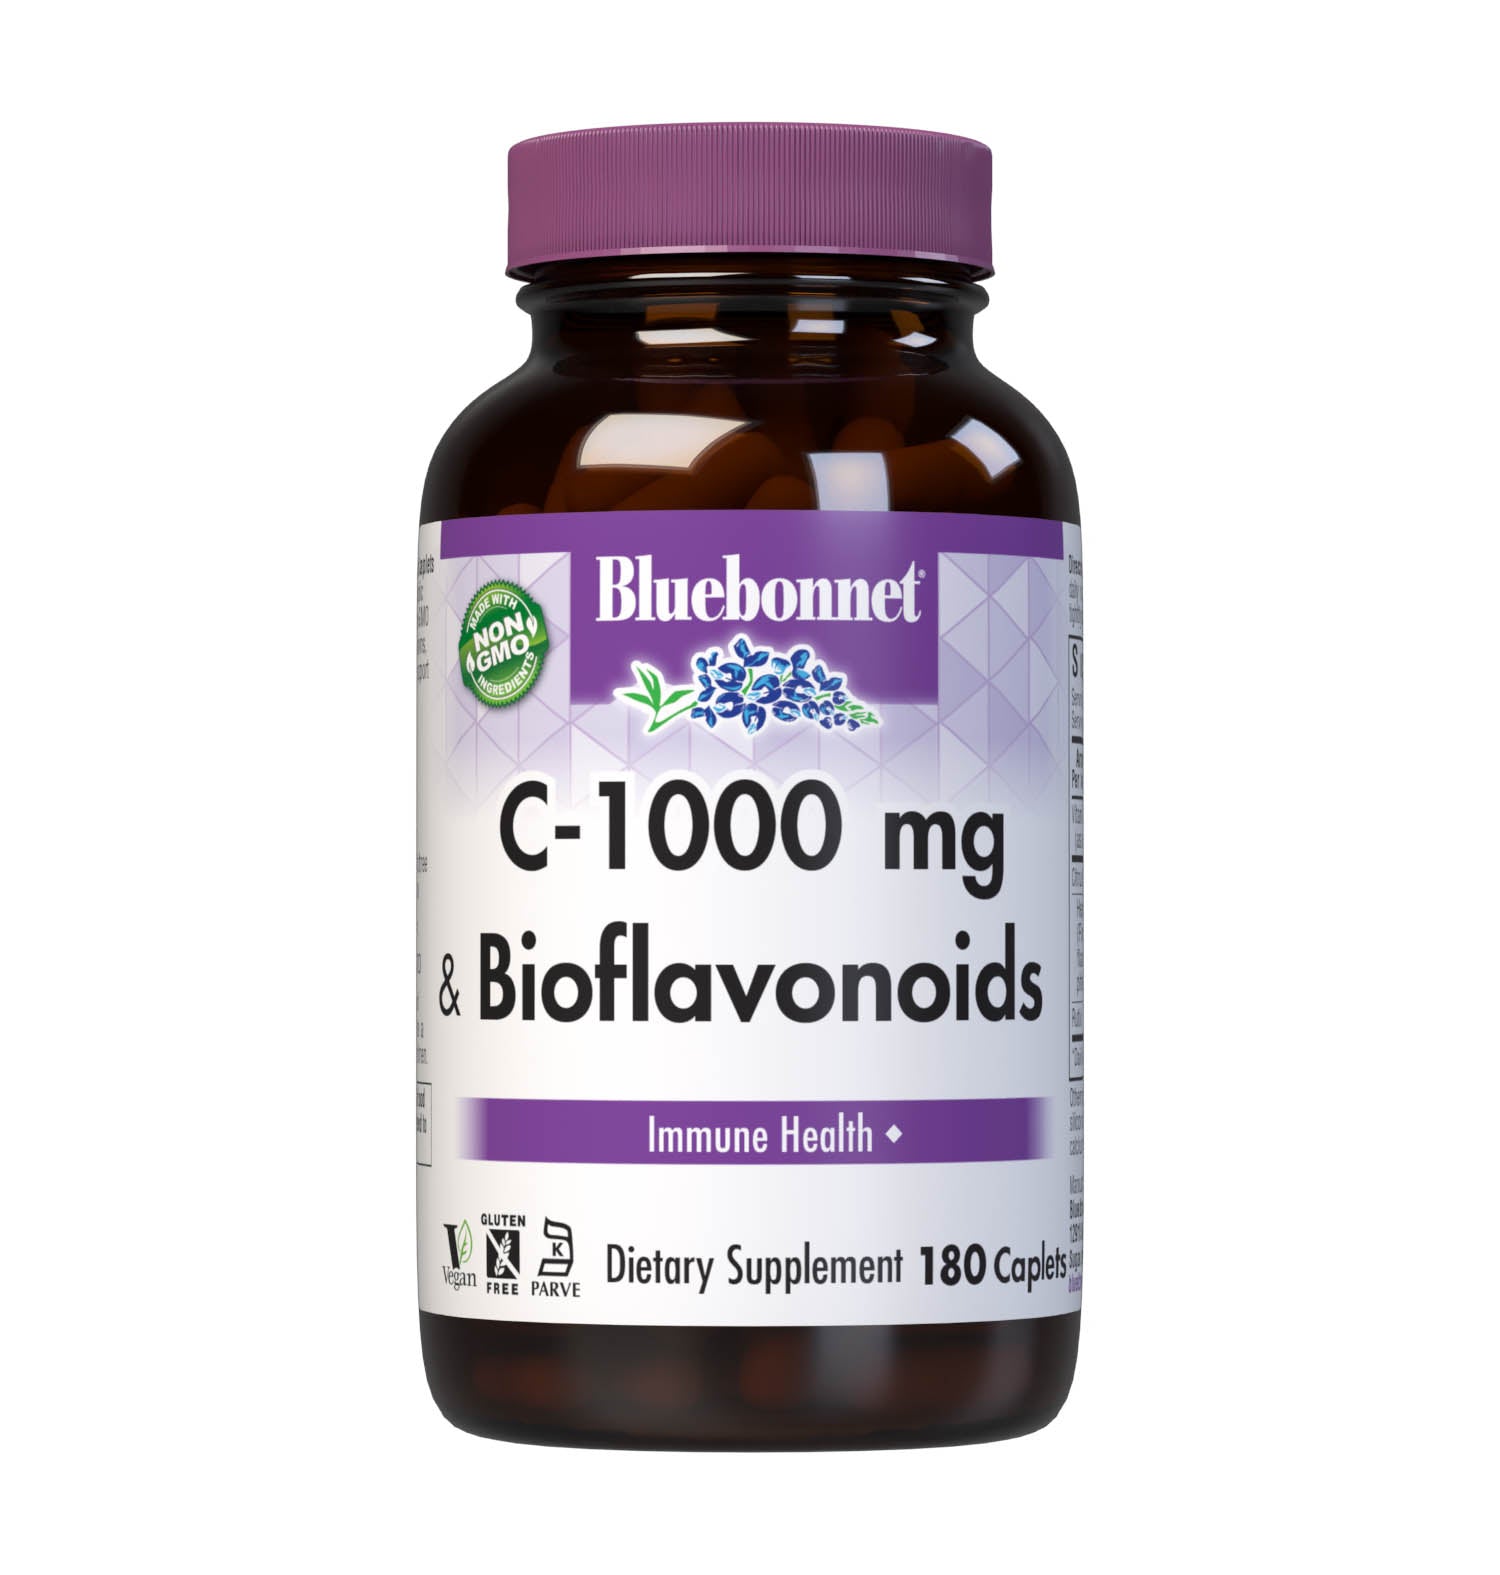 Bluebonnet’s C-1000 mg & Bioflavonoids 180 Caplets are formulated with vitamin C from L-ascorbic acid that is (IP) identity-preserved and non-GMO with citrus bioflavonoids from oranges, lemons, tangerines, grapefruits and limes to help support immune health. #size_180 count